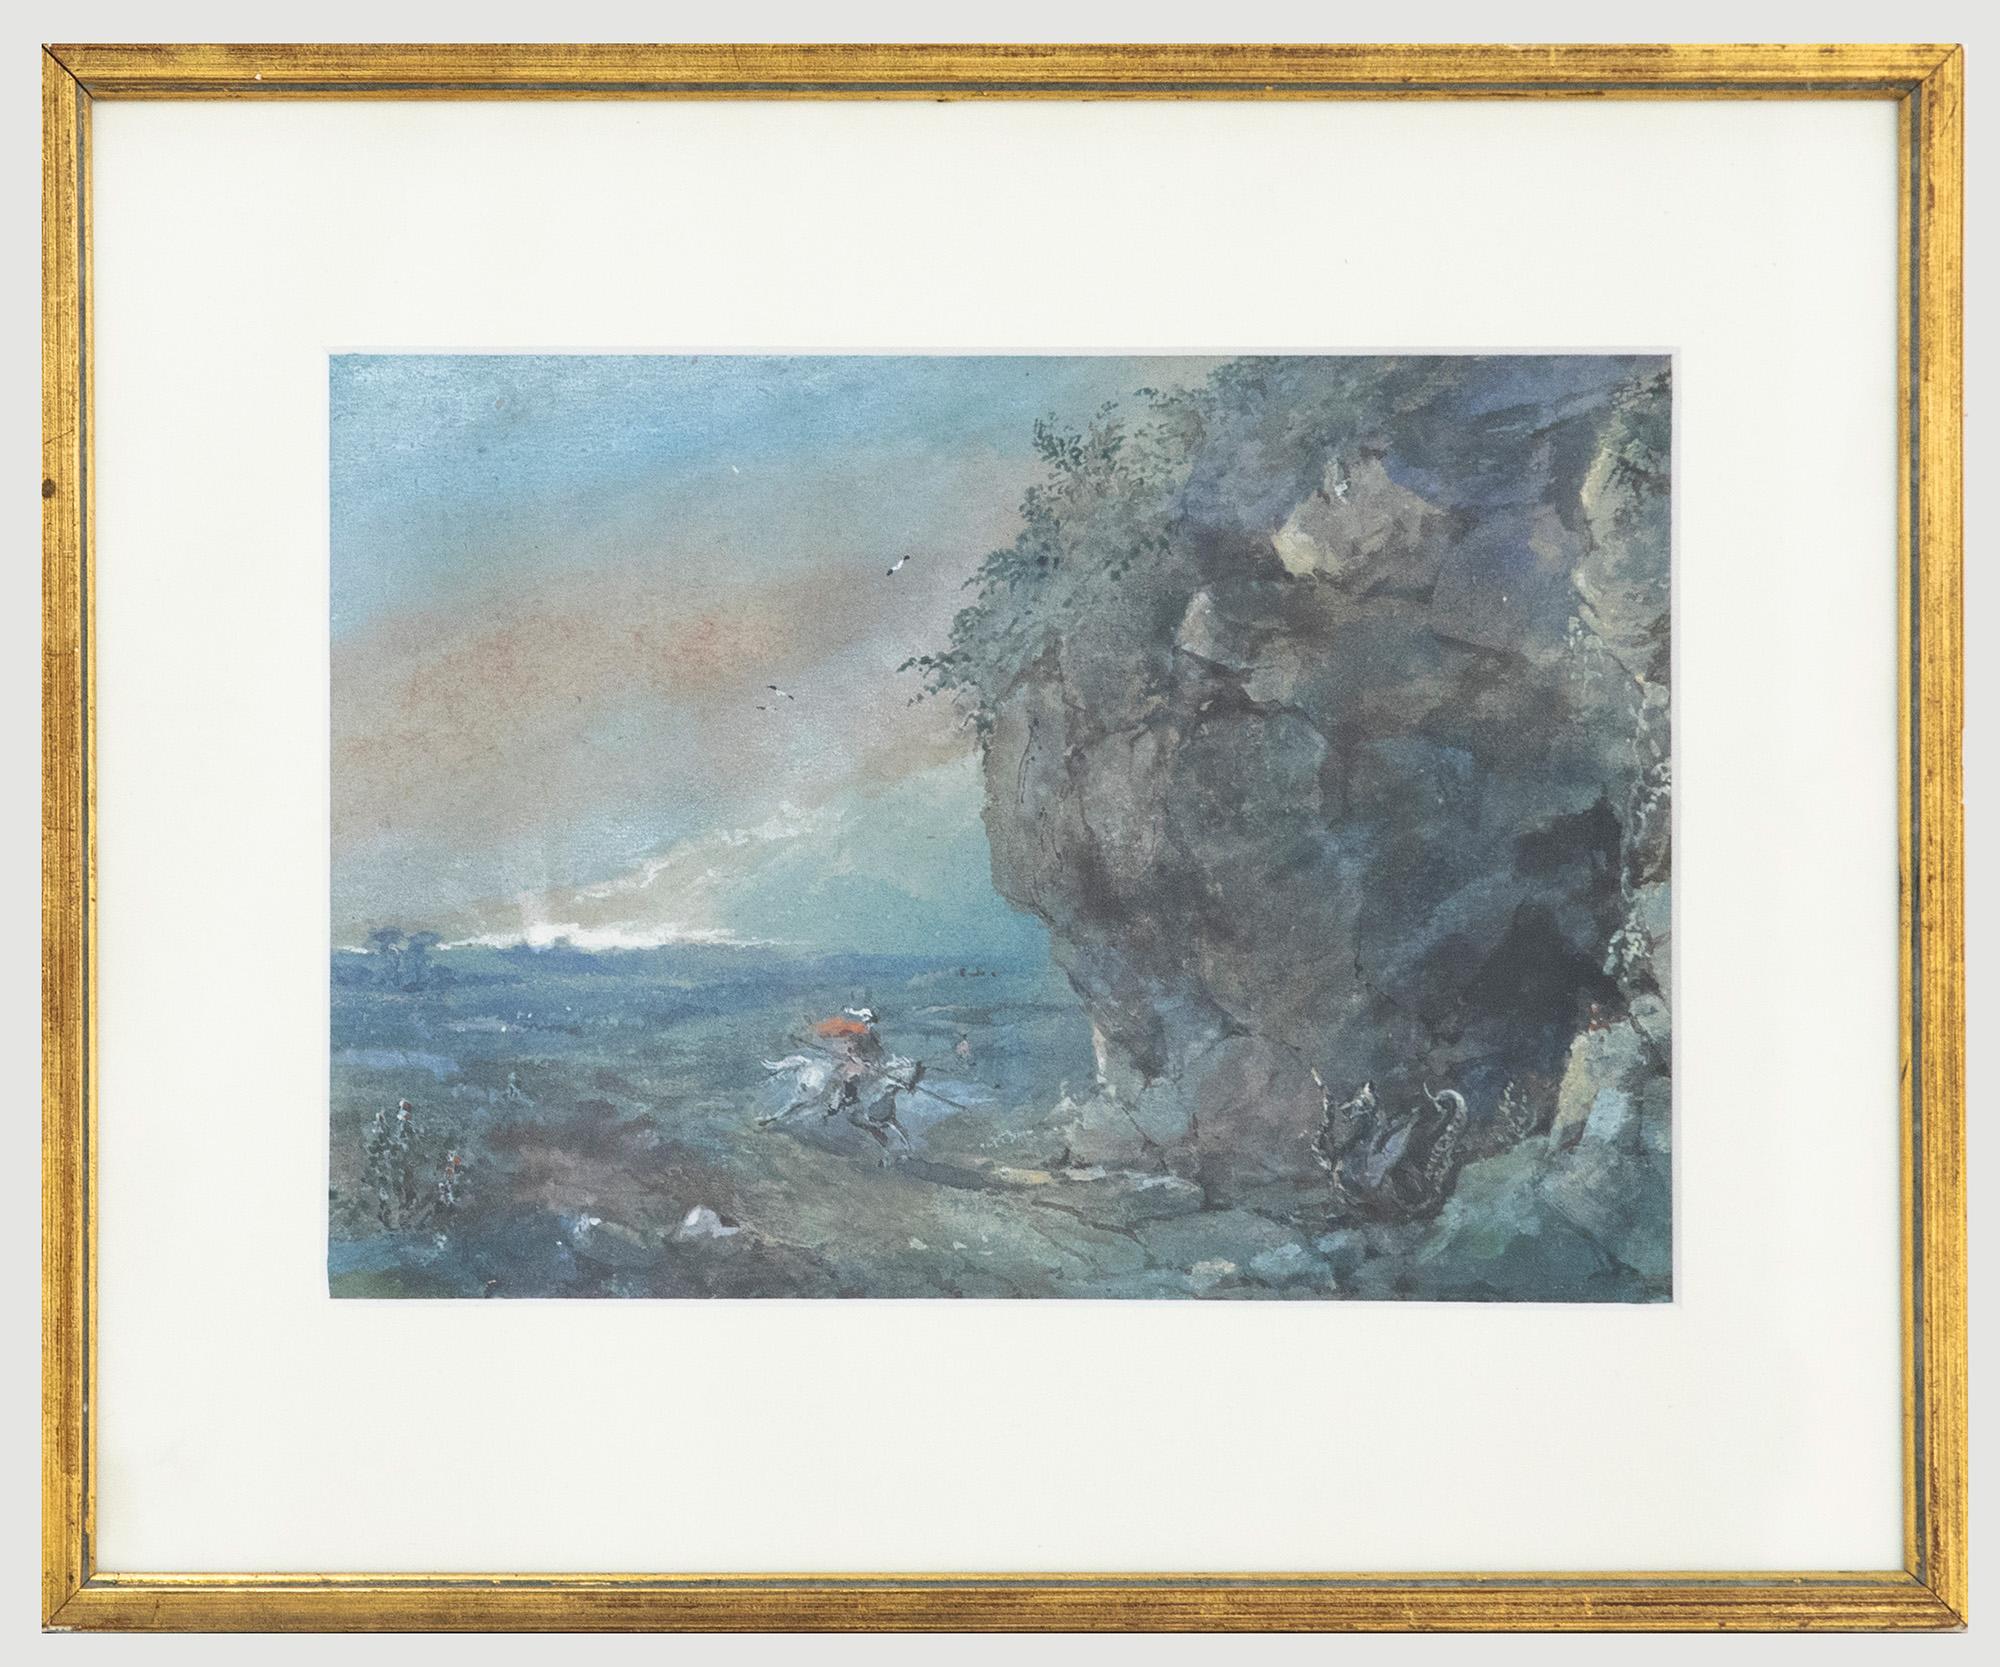 A charming mid-19th-century watercolour by Charlotte Vawser (fl.1837-1875), depicting the legend of St George and the Dragon. Here Vawser has capture St George riding in pursuit of the terrorising beast, while the rest of the knights coward in the